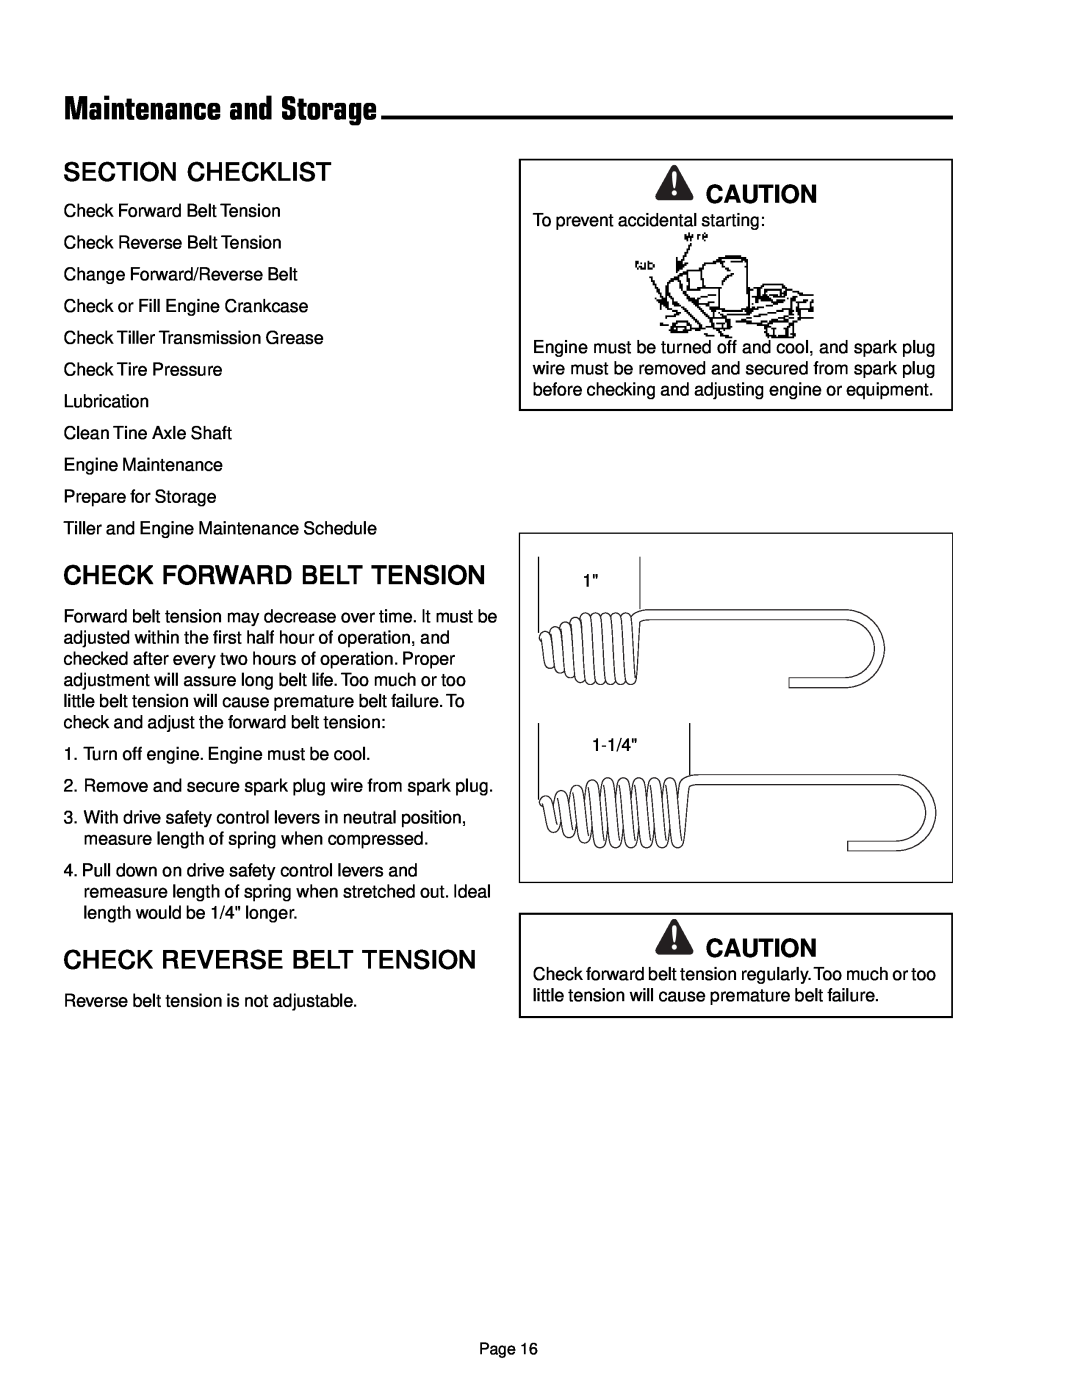 Simplicity 1693847 Maintenance and Storage, Check Forward Belt Tension, Check Reverse Belt Tension, Section Checklist 